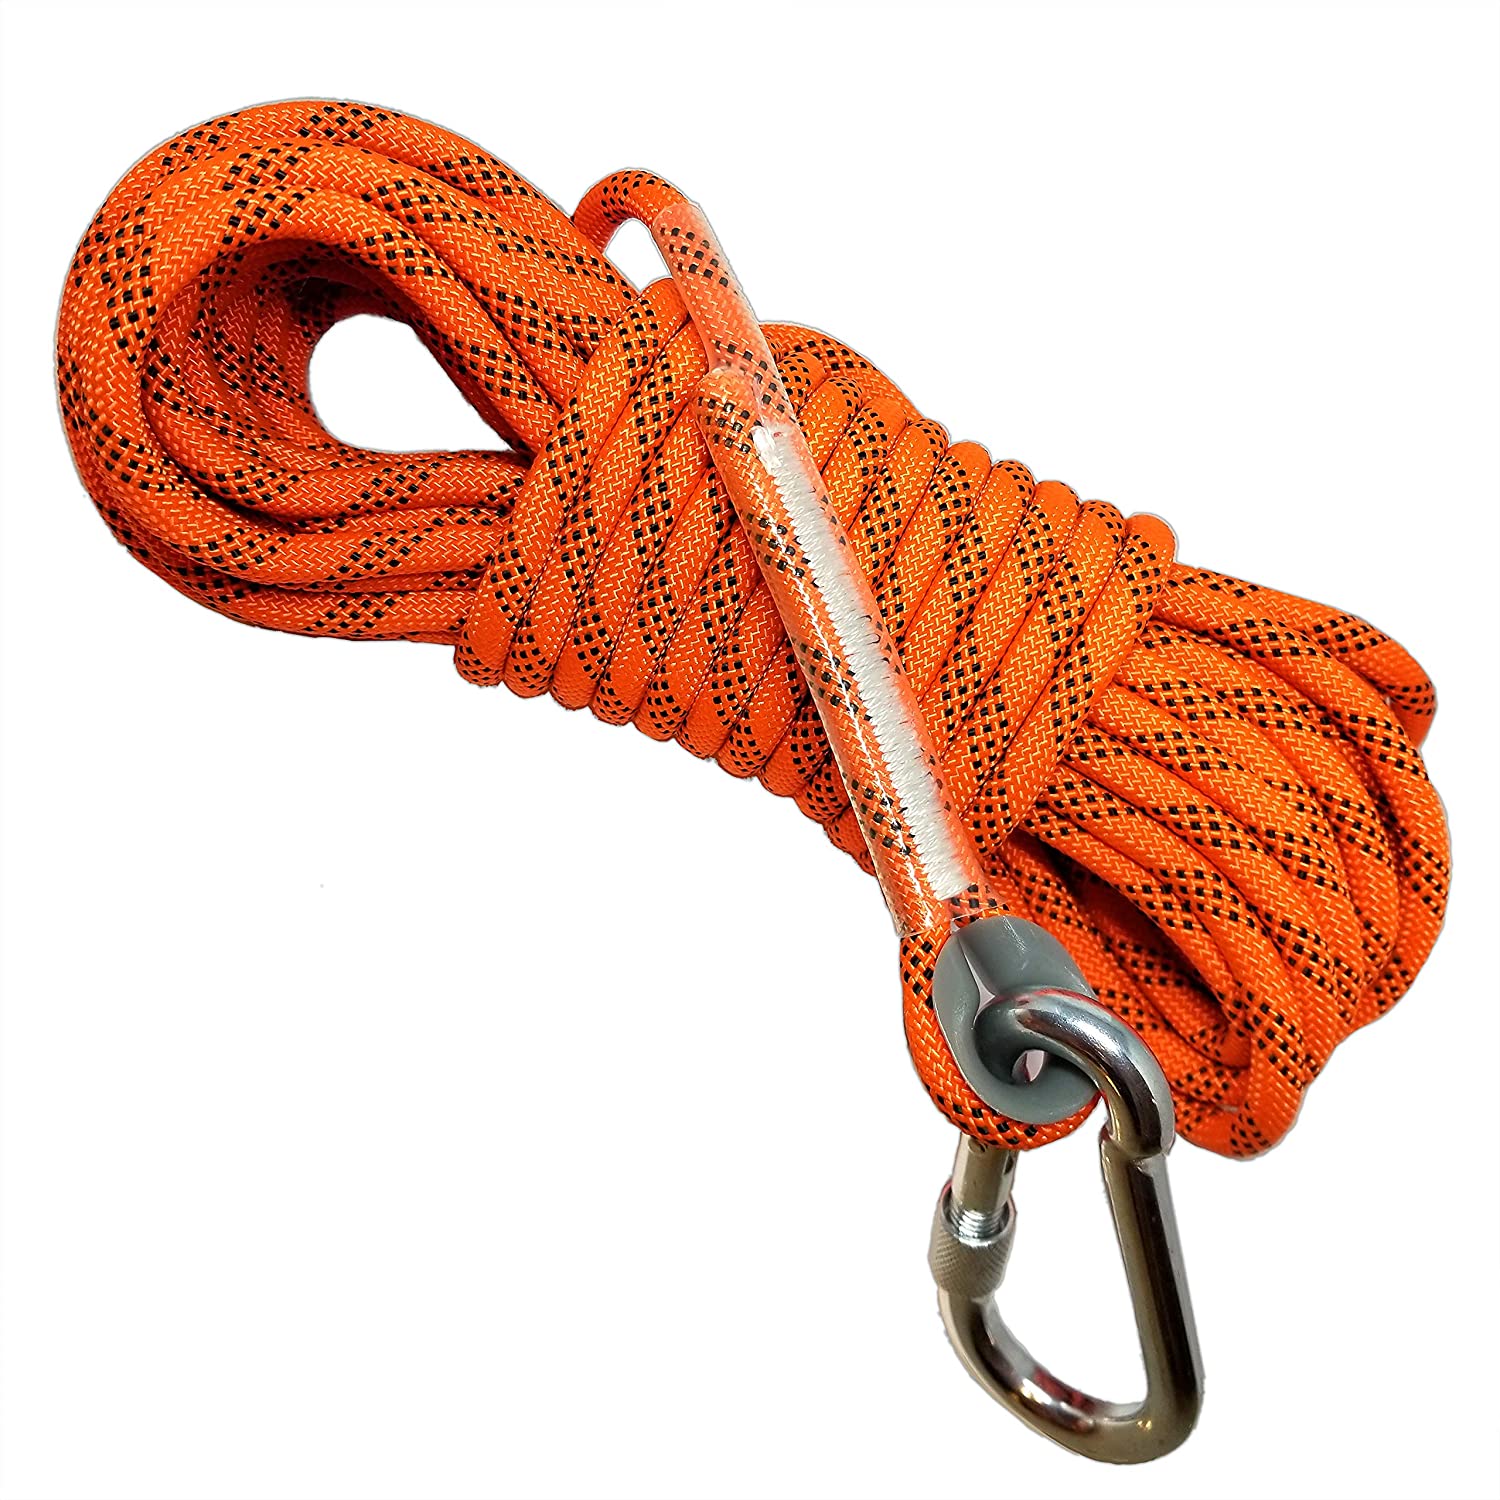 The Best Rope for Fishing [June 2020] Toolshed Stuff